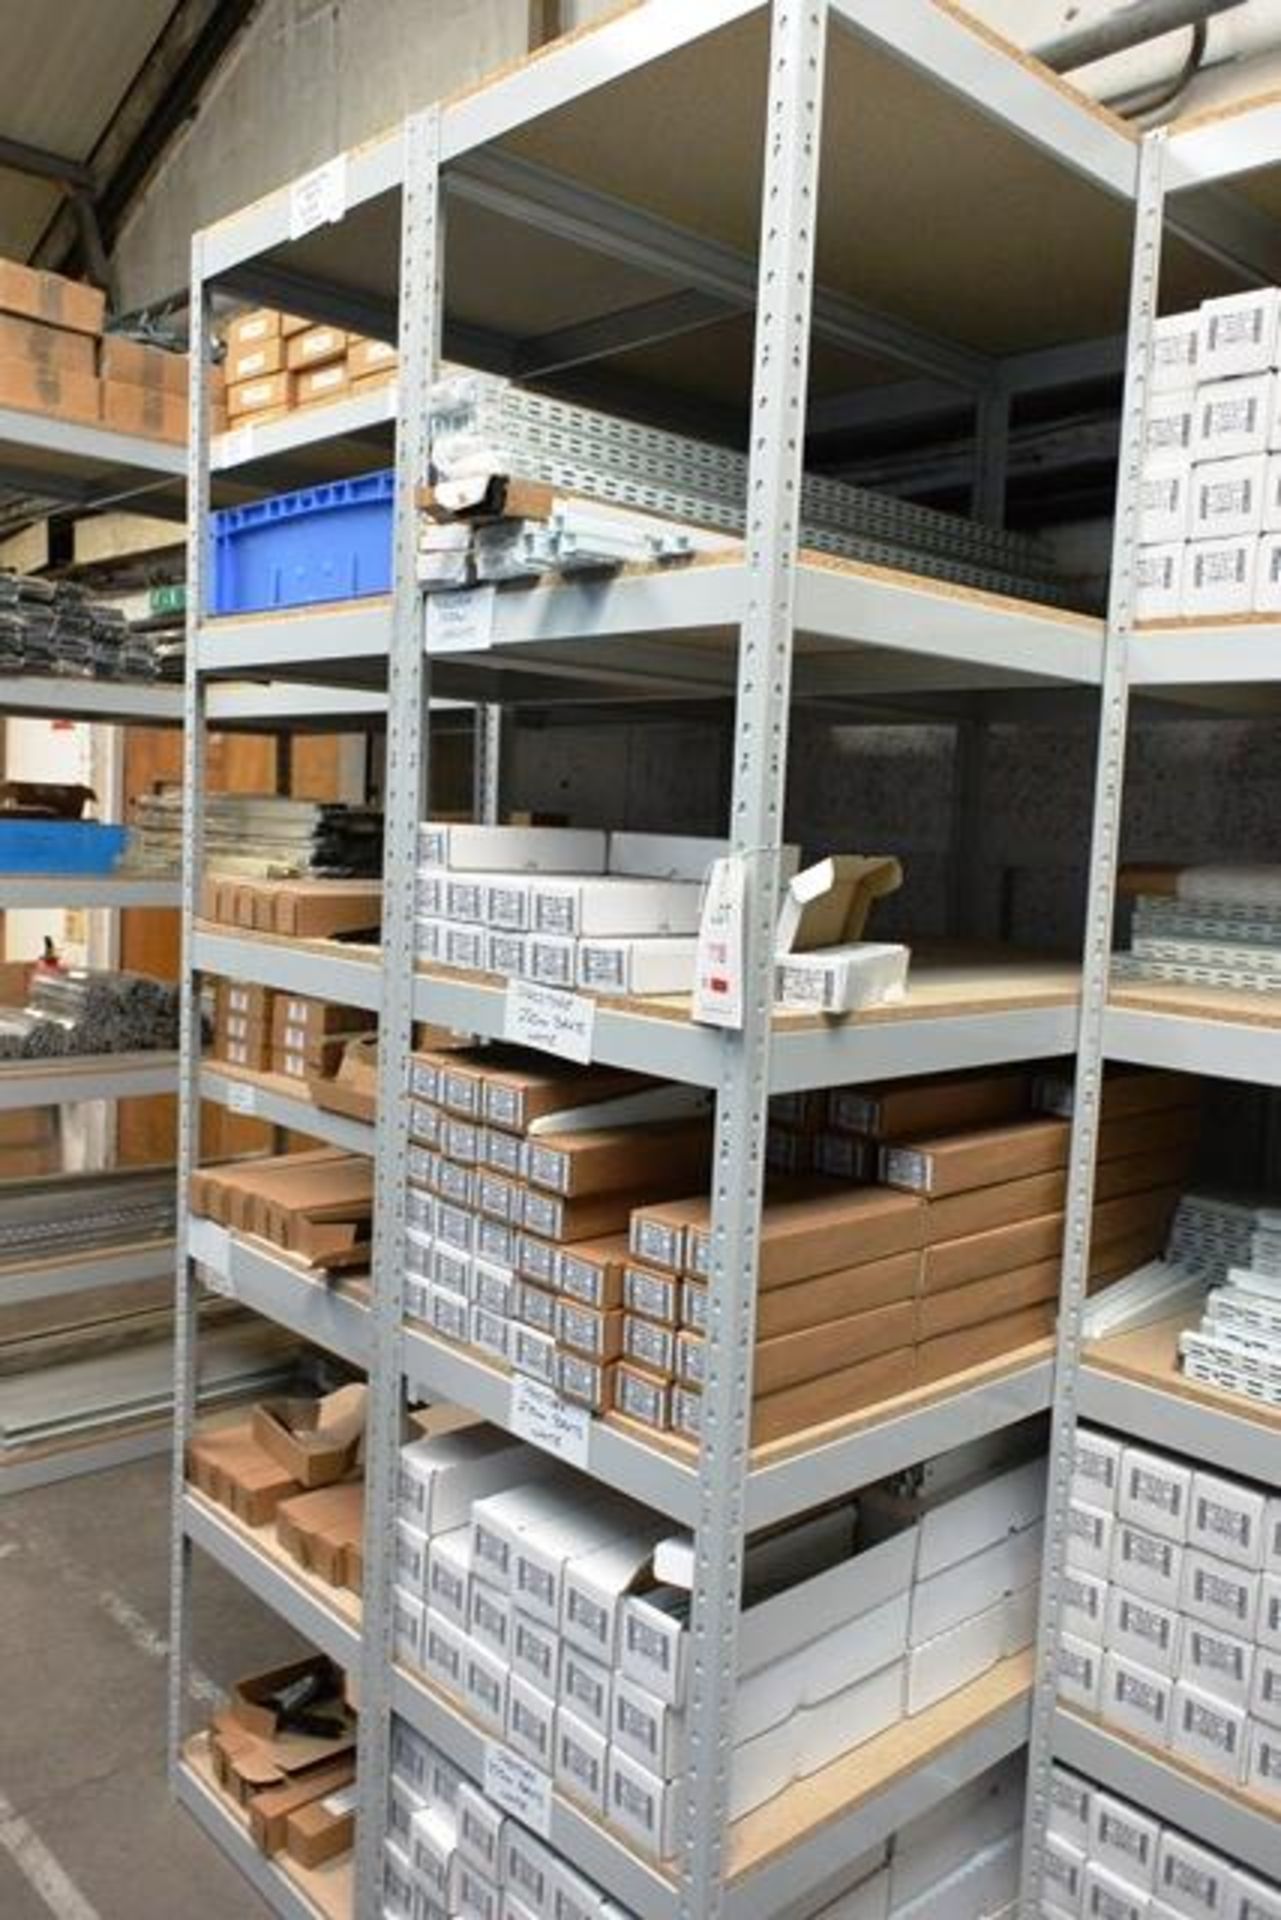 Two bays of adjustable boltless stores racking (6 shelf), approx 2.4 x 1.5m (excludes all contents).